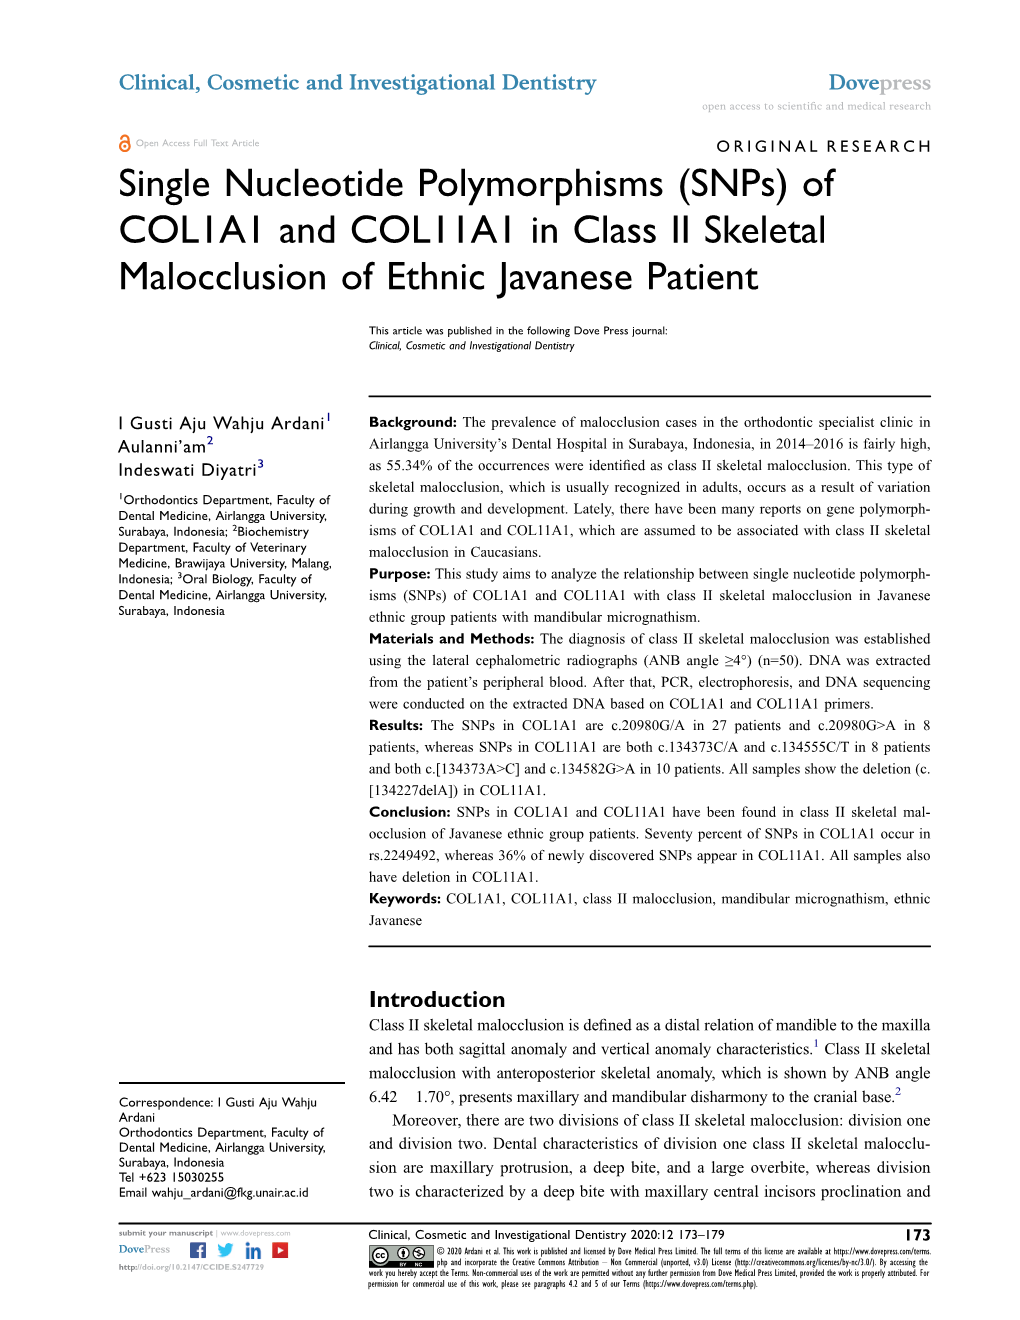 Single Nucleotide Polymorphisms (Snps) of COL1A1 and COL11A1 in Class II Skeletal Malocclusion of Ethnic Javanese Patient